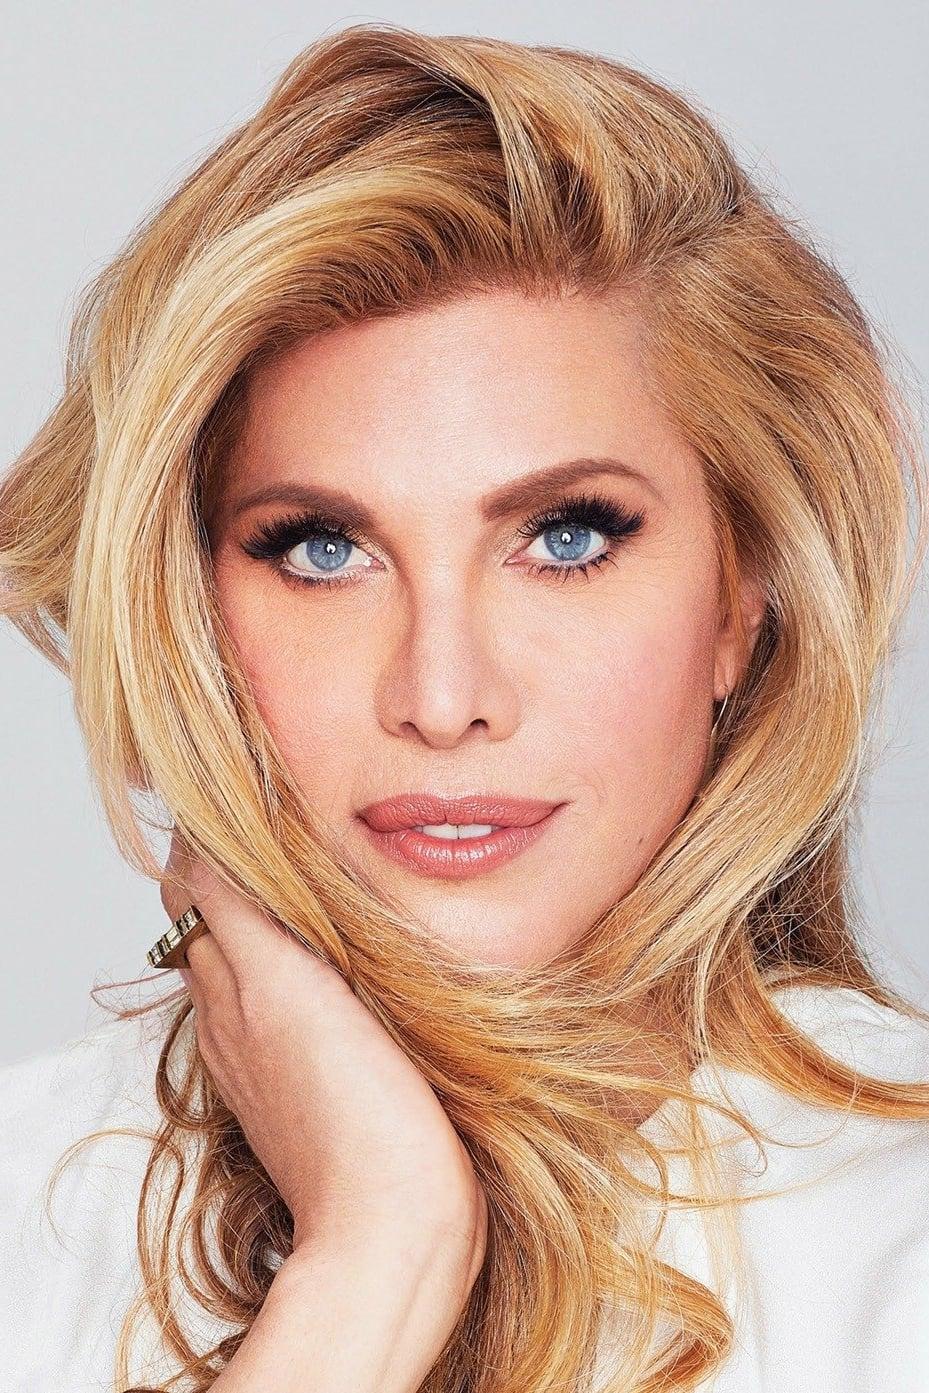 Candis Cayne poster